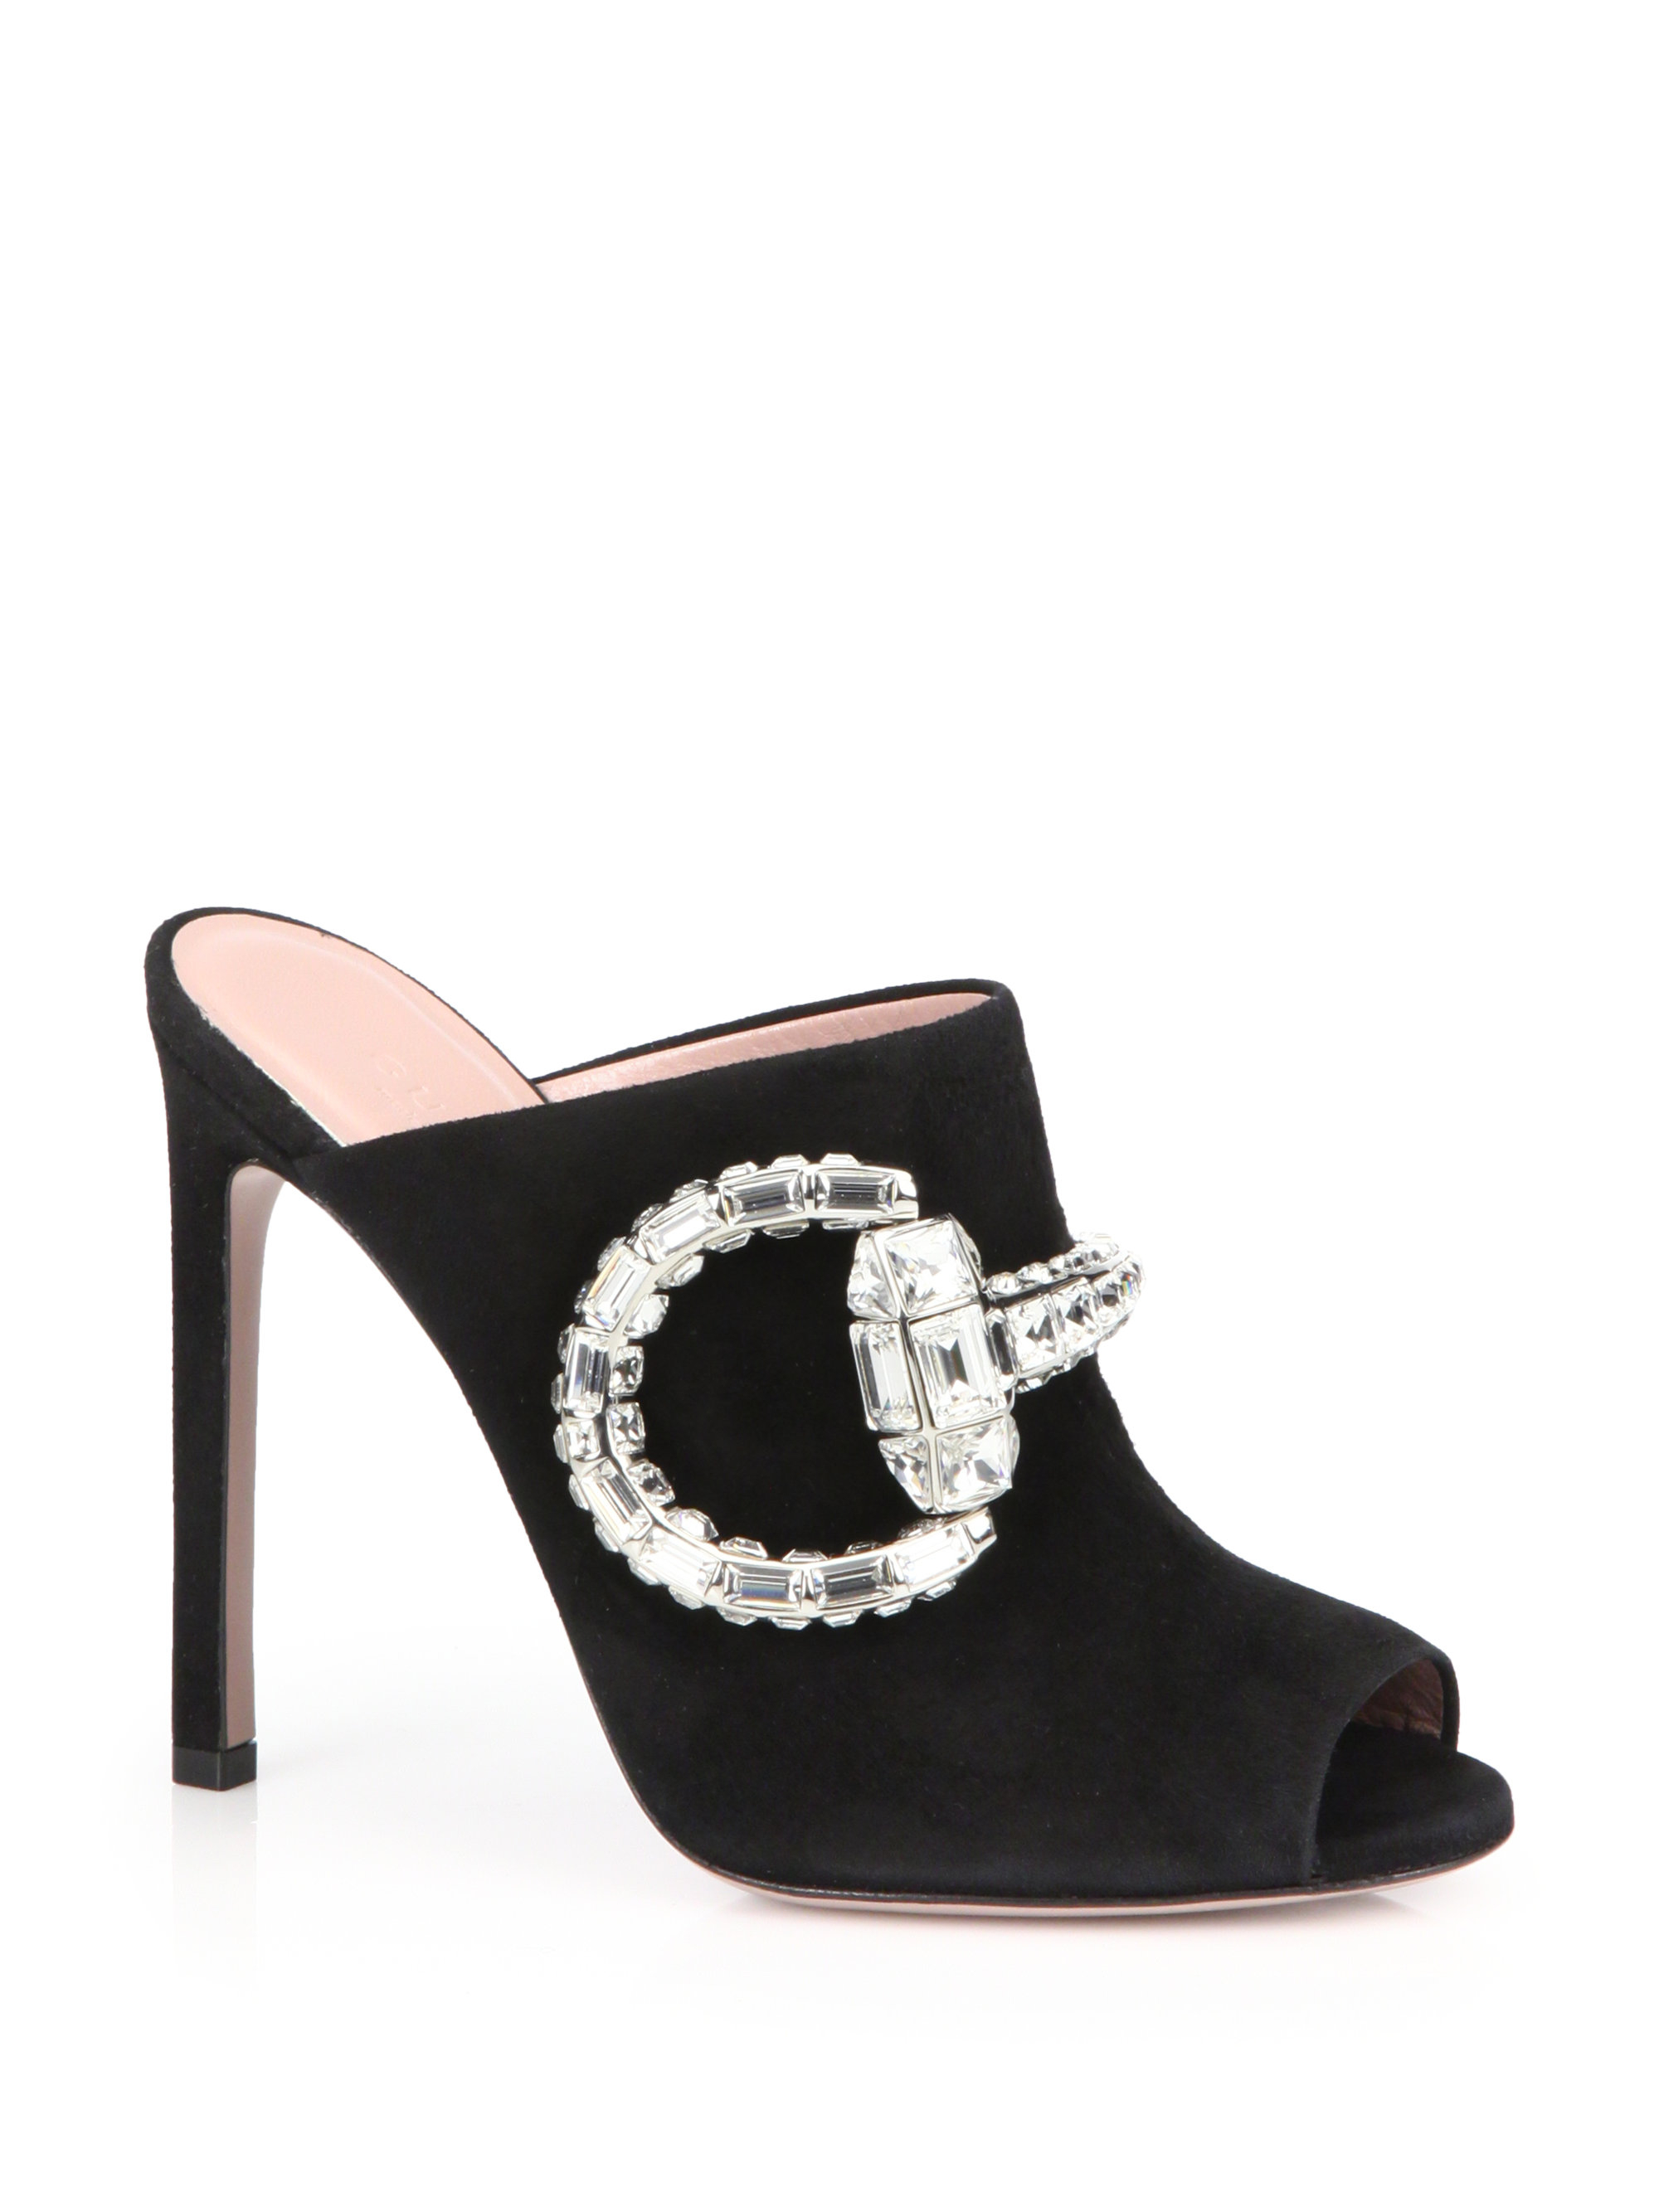 Gucci Maxime Crystal Horsebit Suede Sandals in Black - Lyst